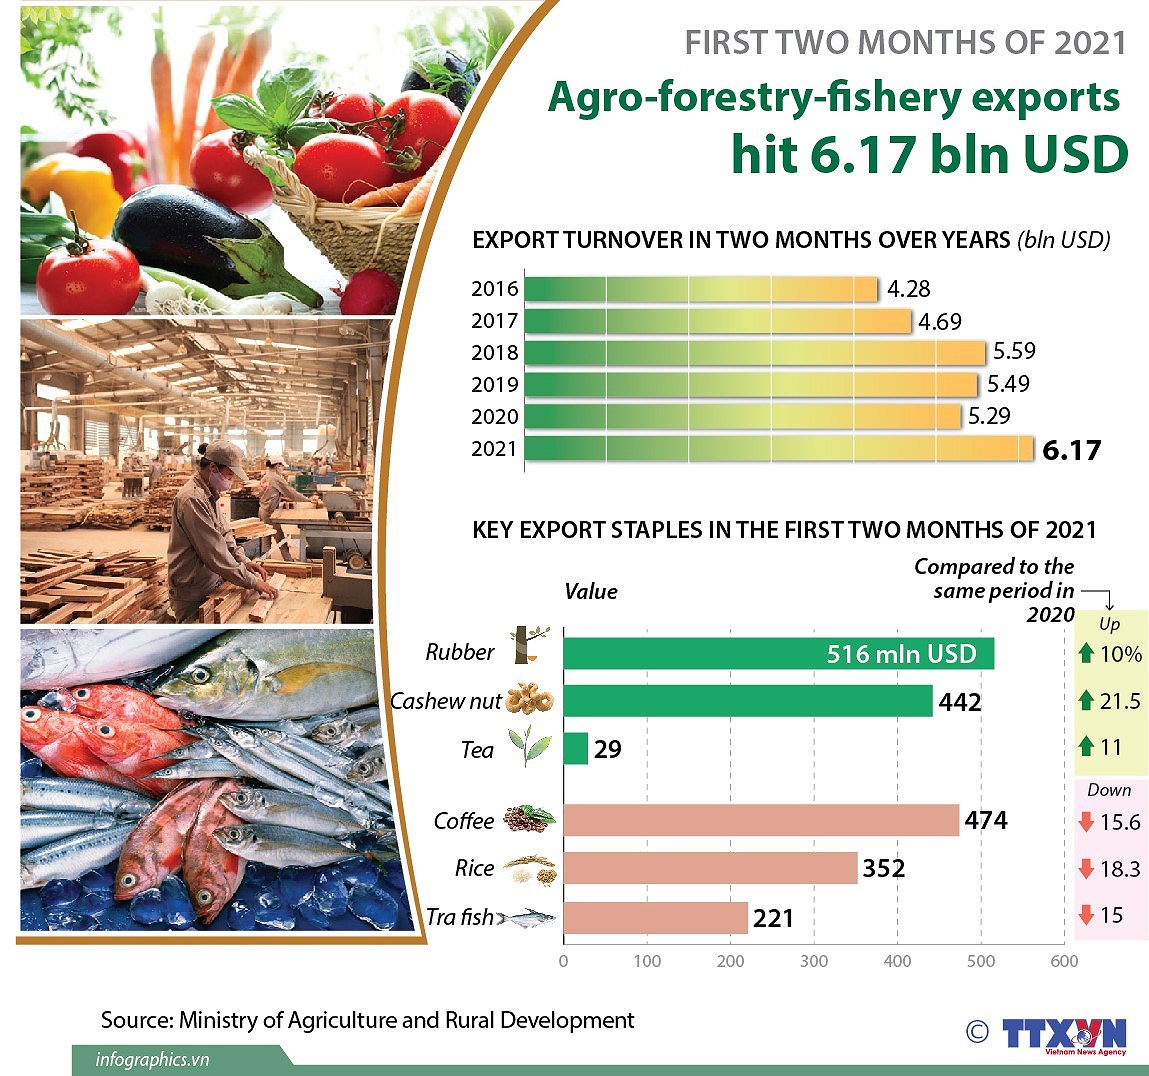 Agro-forestry-fishery exports hit 6.17 bln USD hinh anh 1